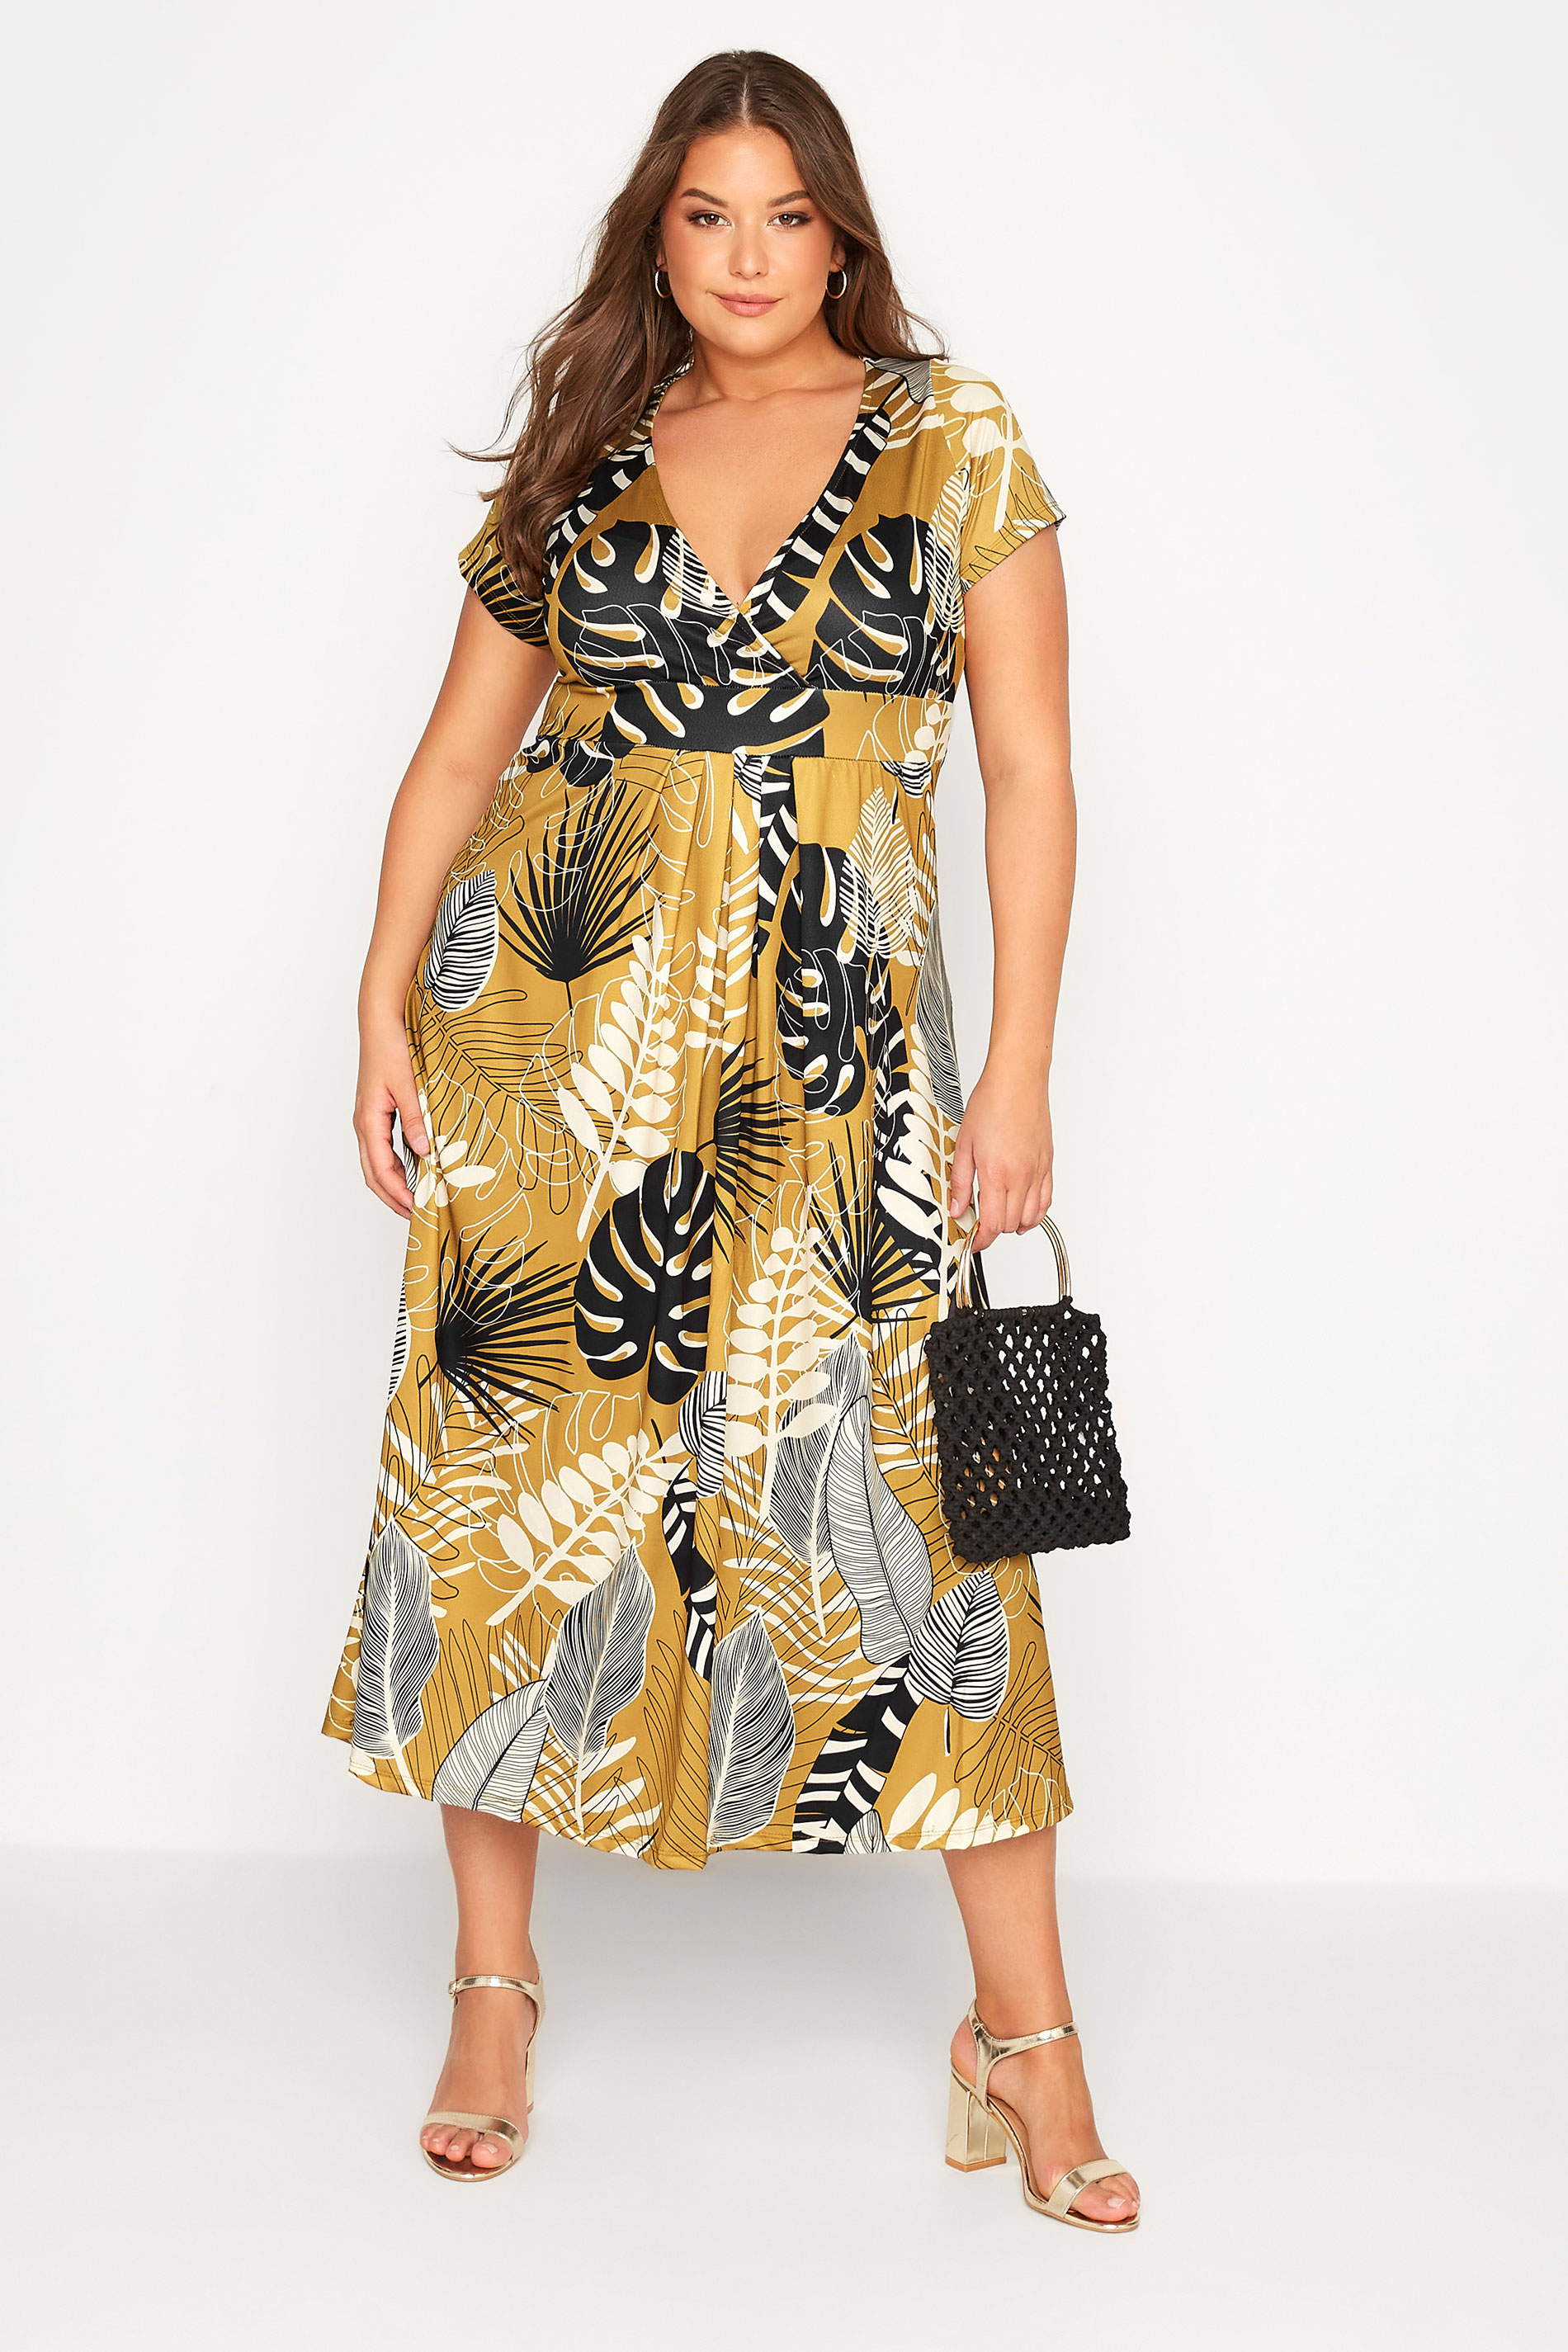 Robes Grande Taille Grande taille  Robes Longues | Curve Mustard Yellow Leaf Print Maxi Wrap Dress - YG37002